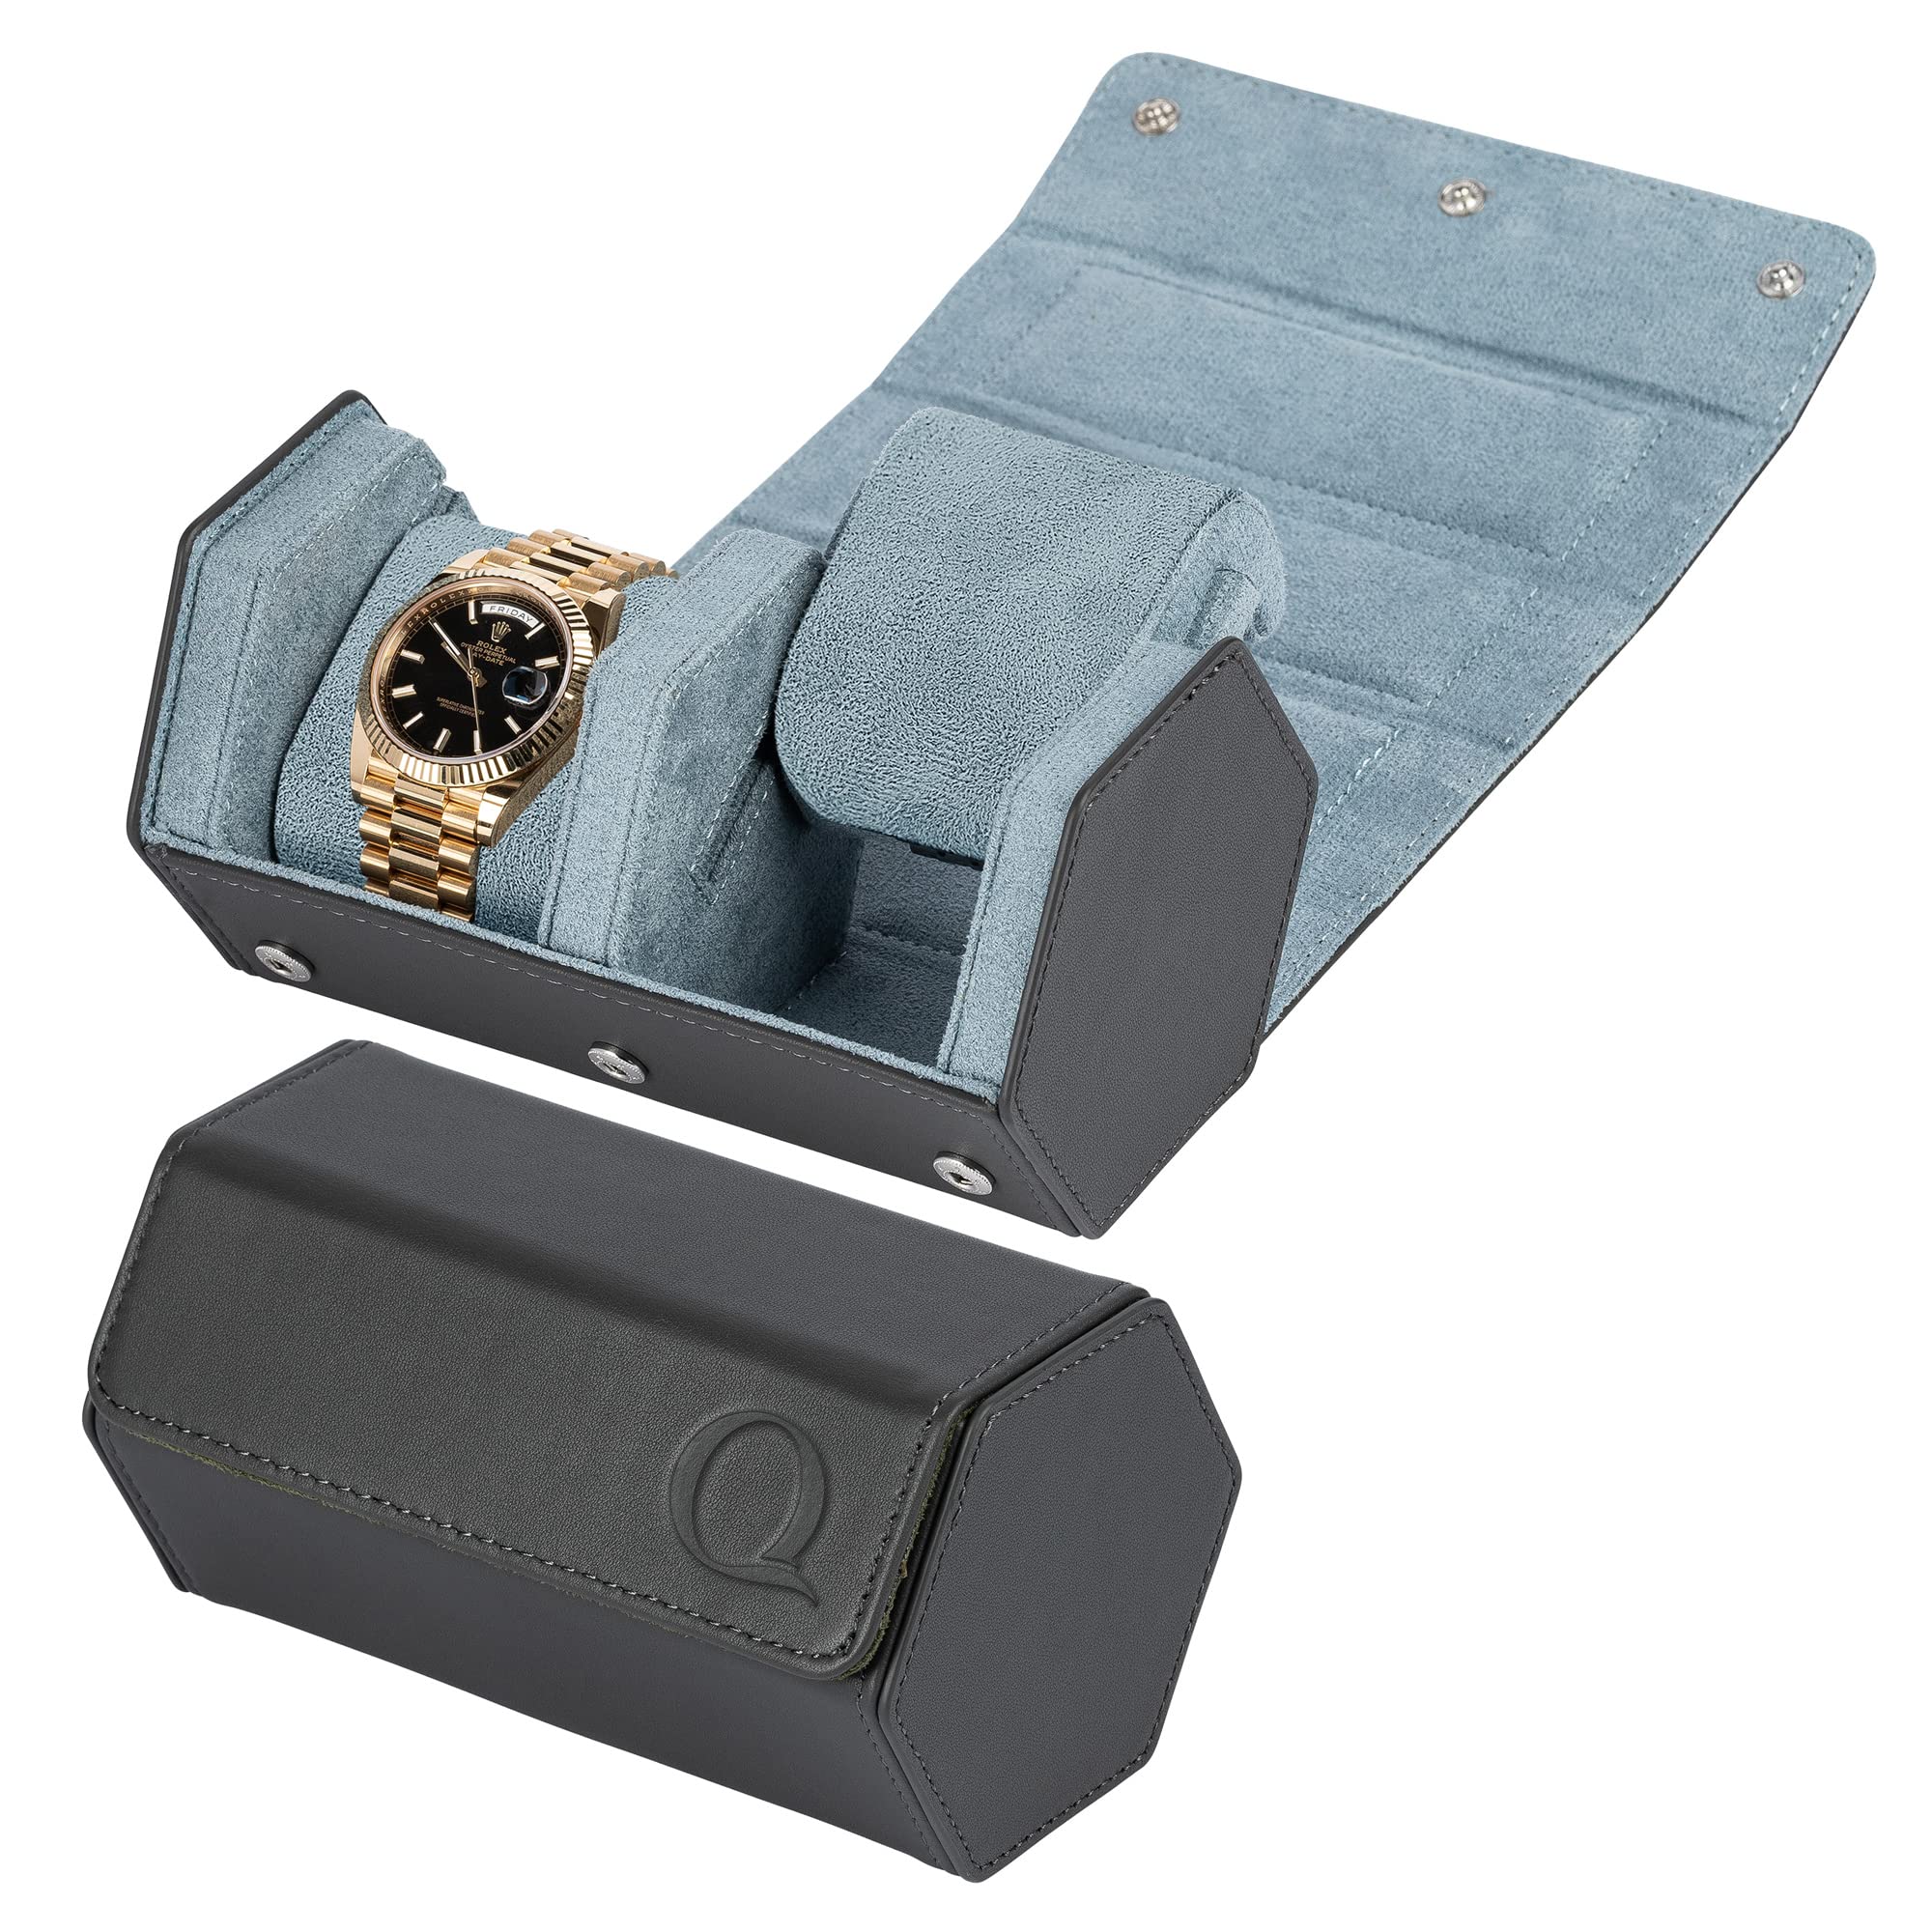 QWATCHBANDS Dual Leather Travel Watch Roll Case + Leather Travel Watch Pouch (Grey/Sky Blue)